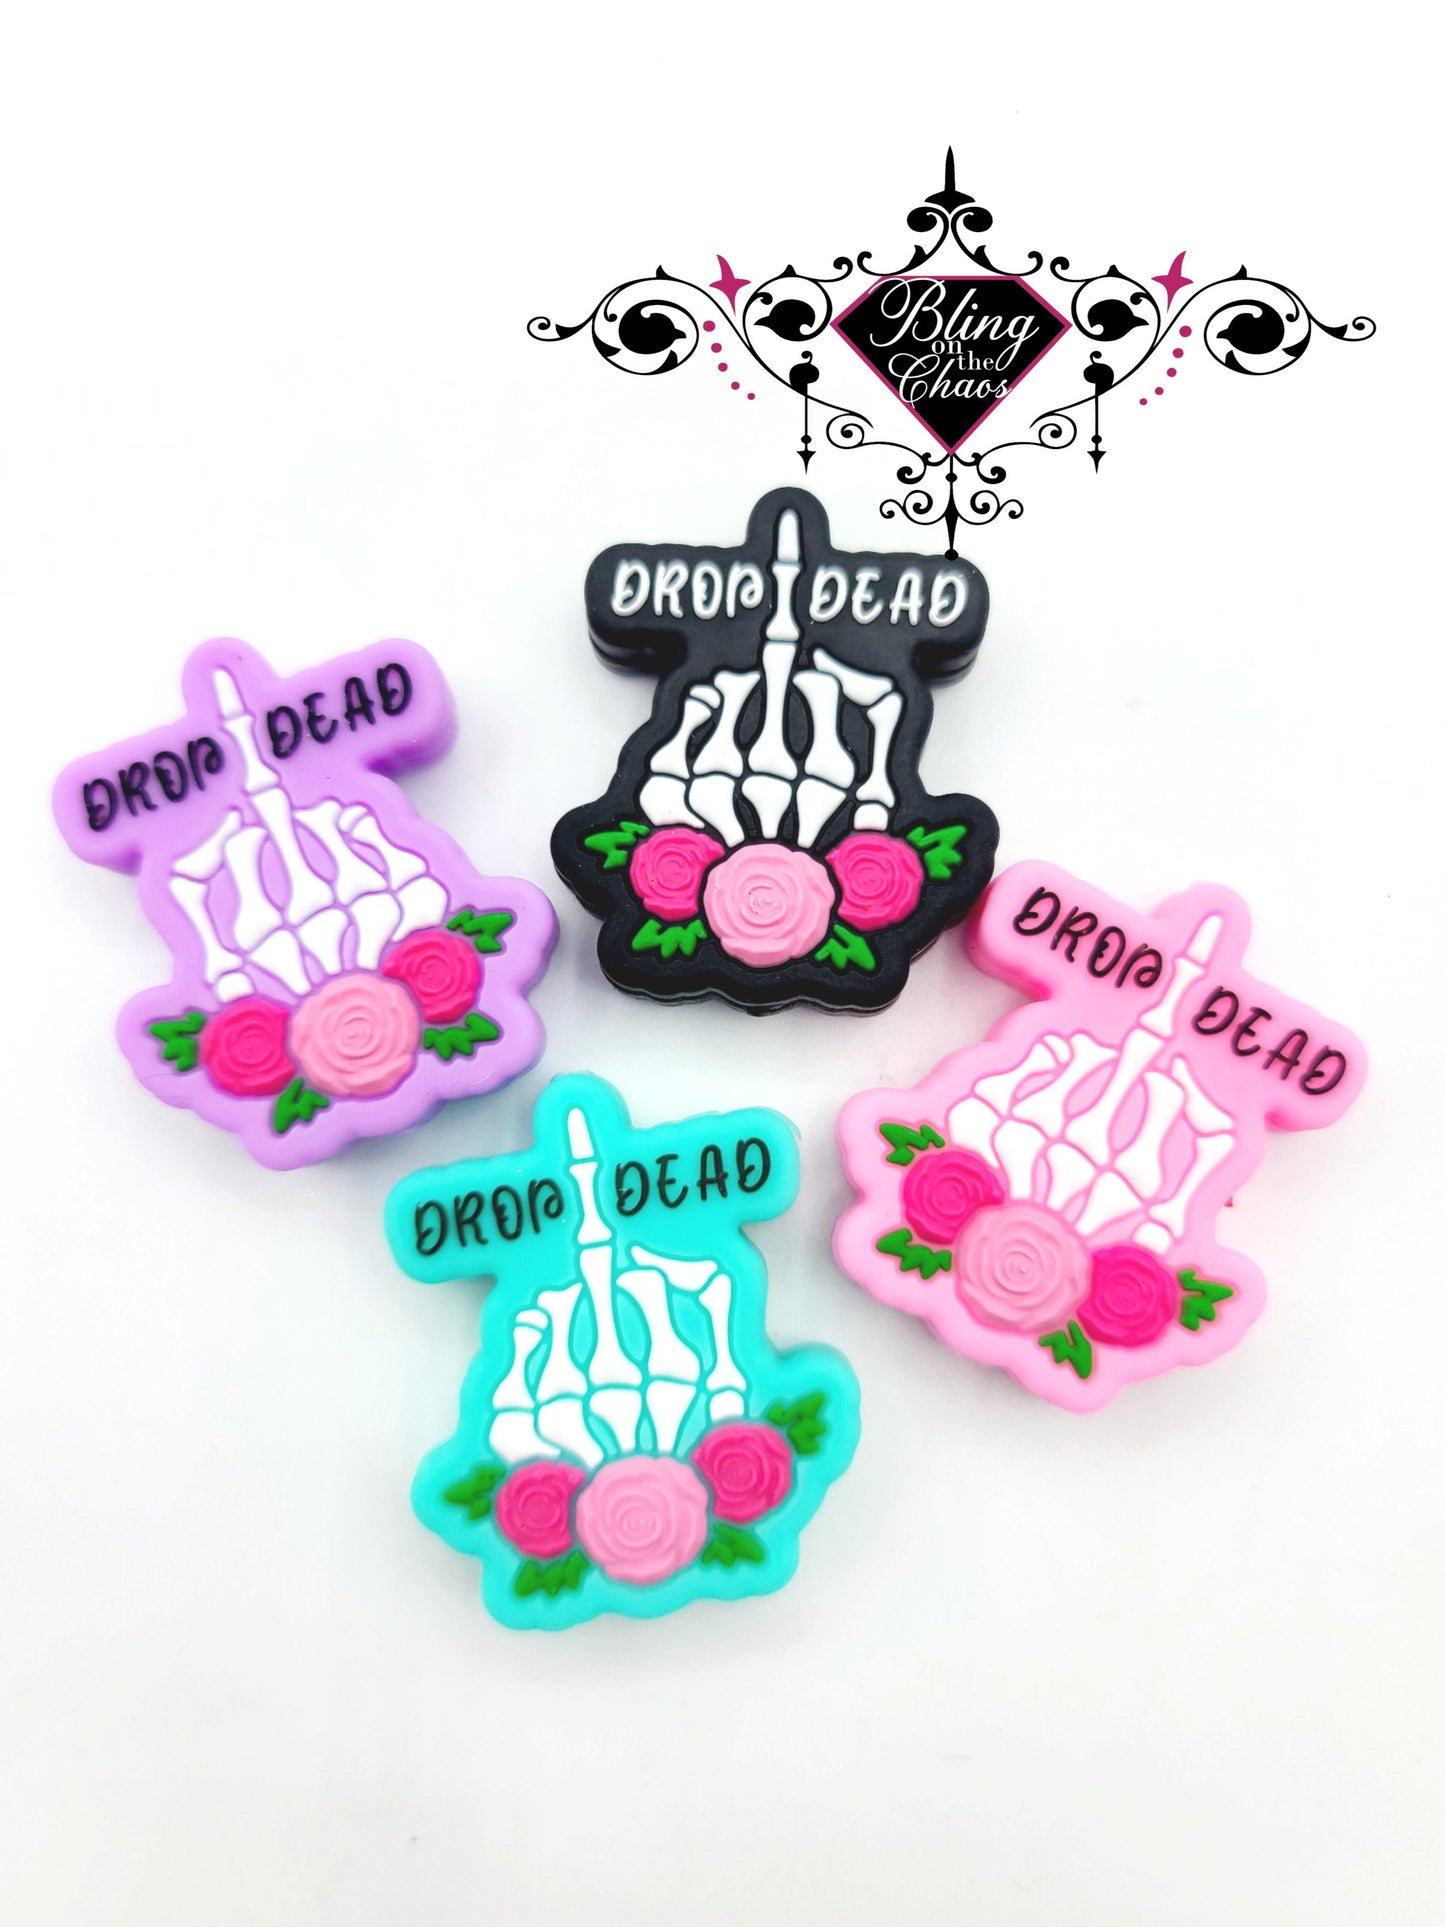 Drop Dead Skeleton Hand Silicone Bead-Bling on the Chaos